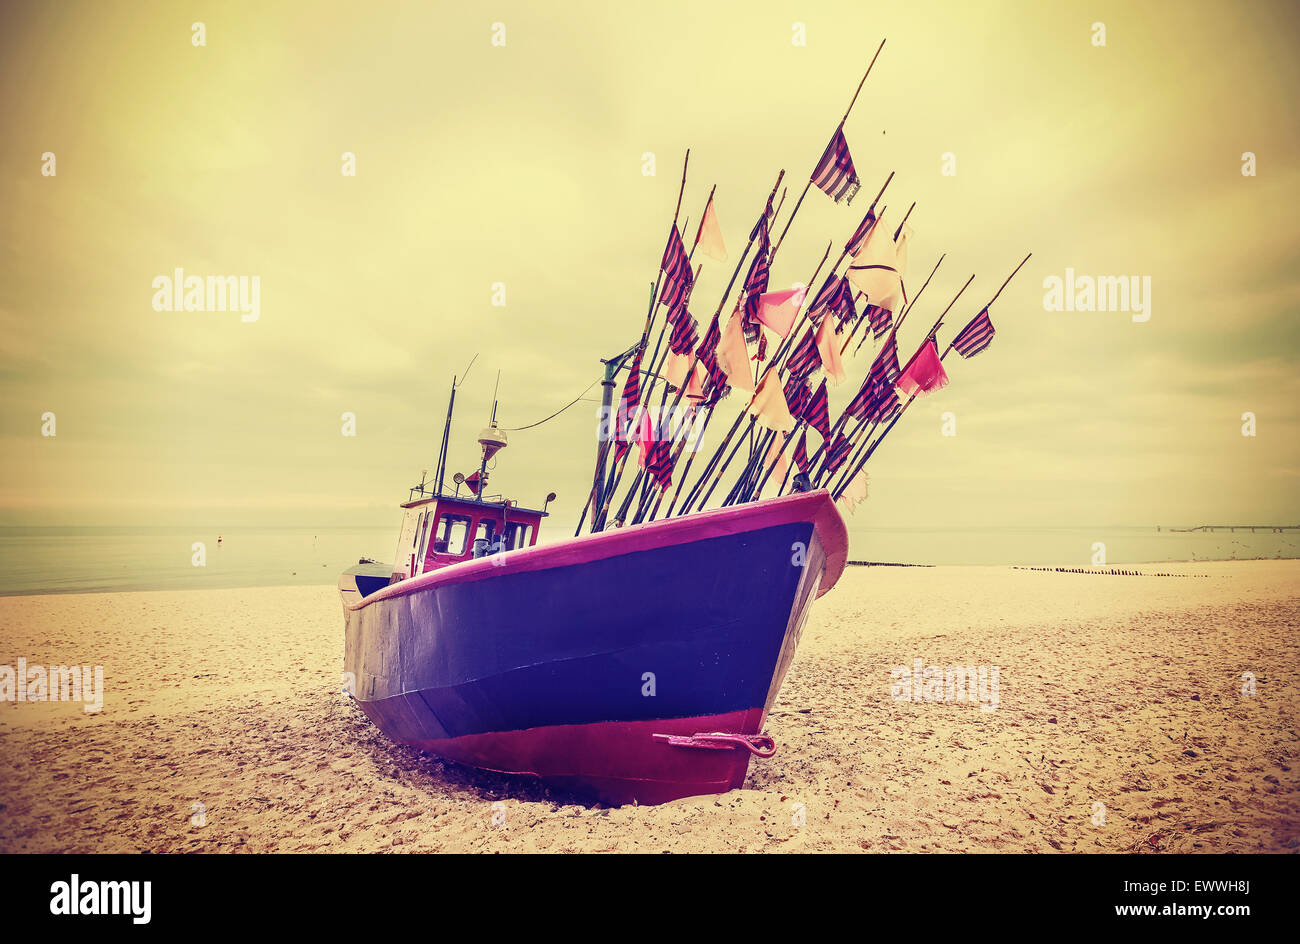 Retro instagram style photo of fishing boat on a beach. Stock Photo